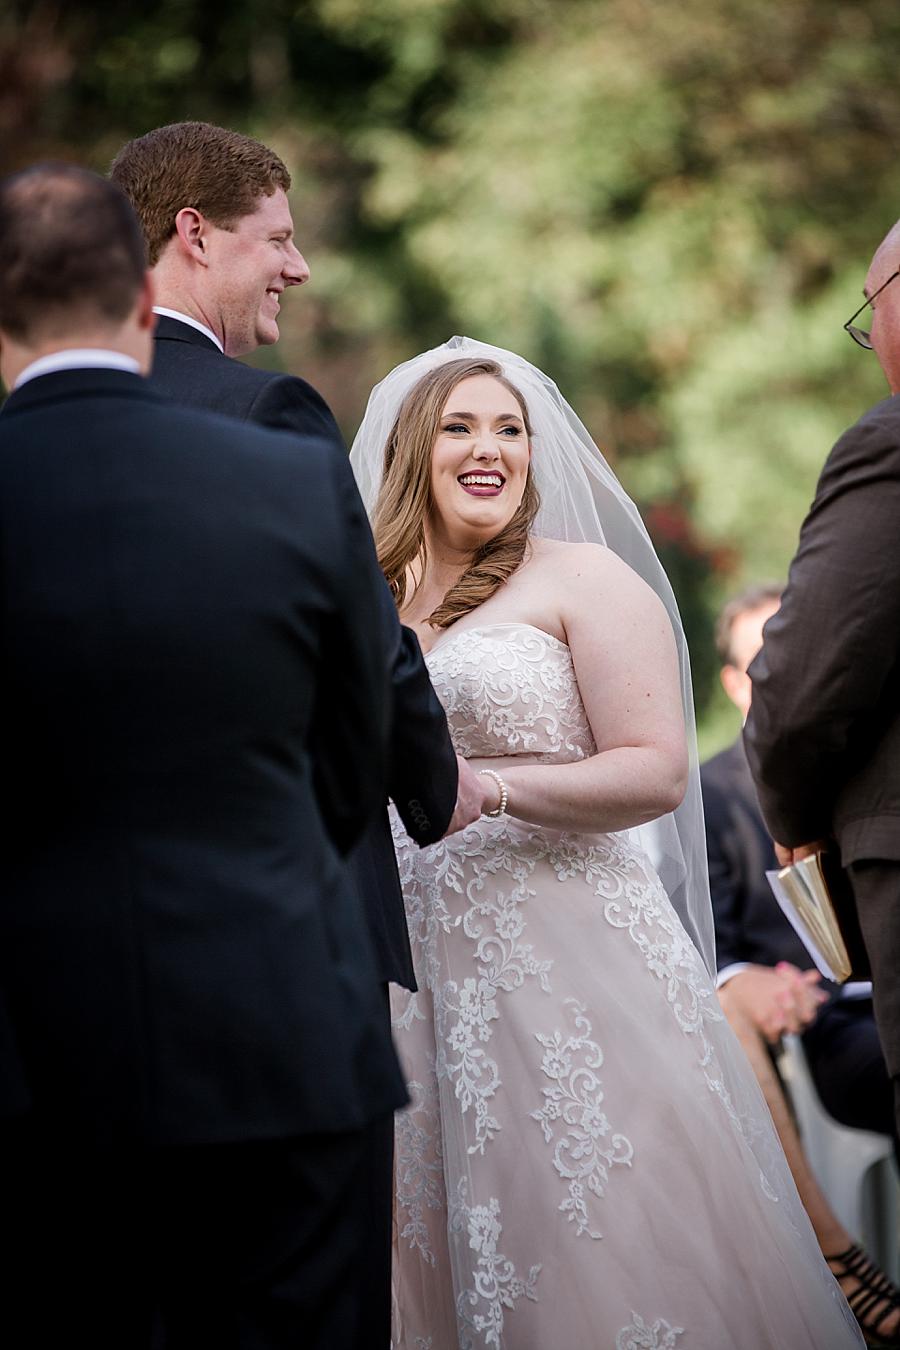 Super smiling bride at this Christopher Place wedding by Knoxville Wedding Photographer, Amanda May Photos